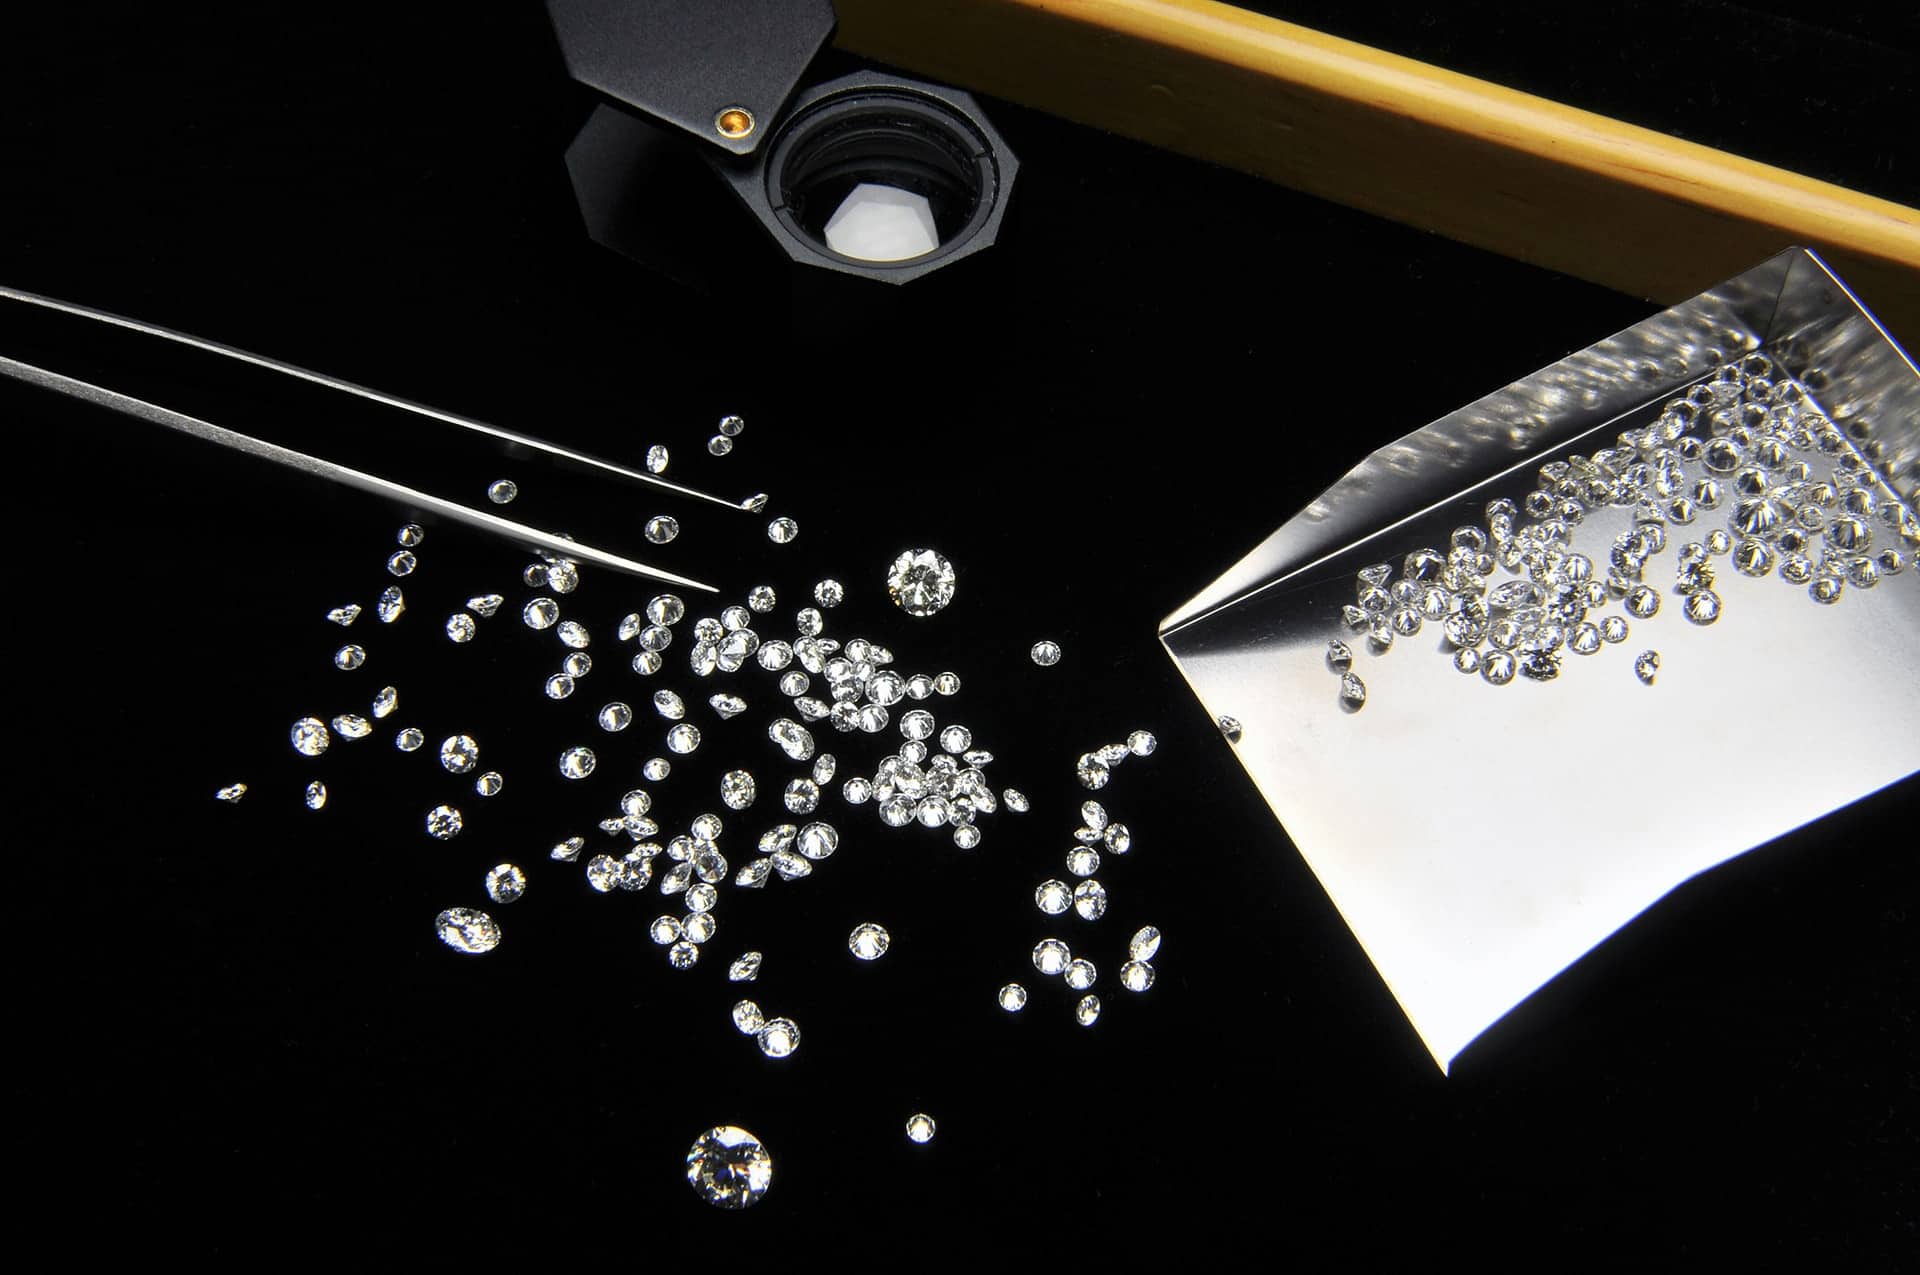 Diamonds scattered on a table from a concierge experience with xennox